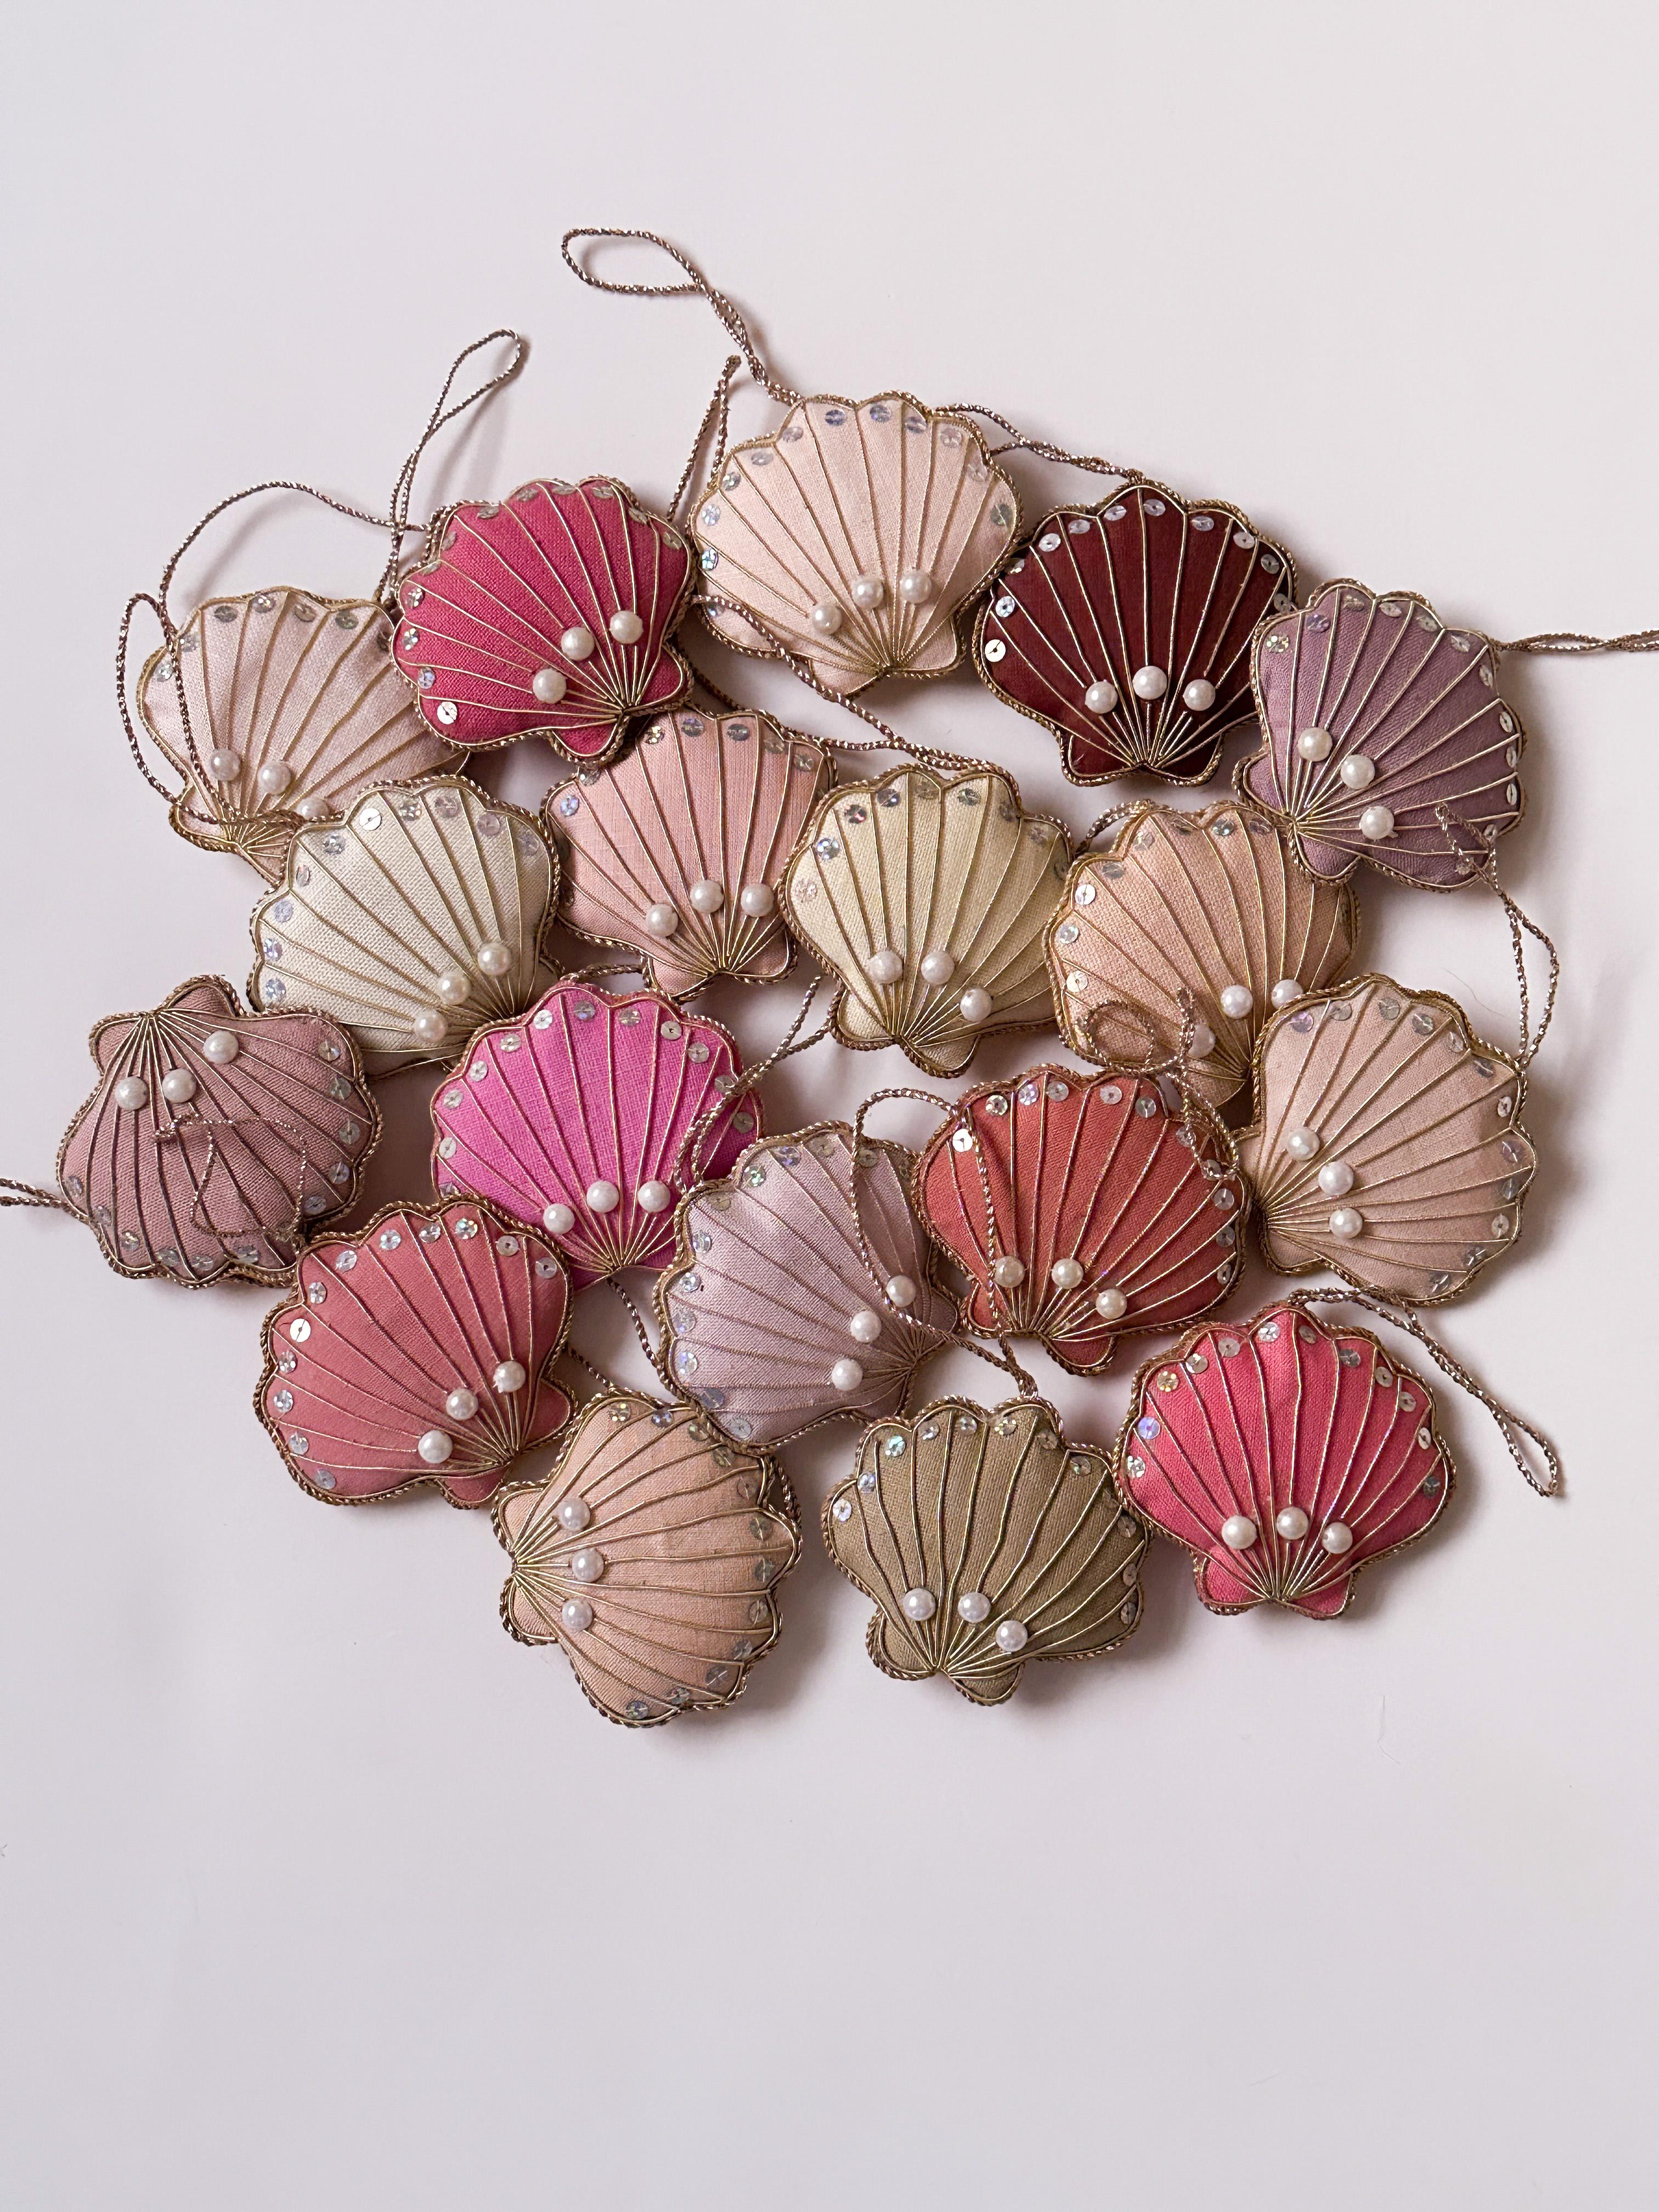 Hand-Crafted Set of 18 Limited Edition Artisan Vintage Pink Irish Linen Shell Tree Ornaments For Sale